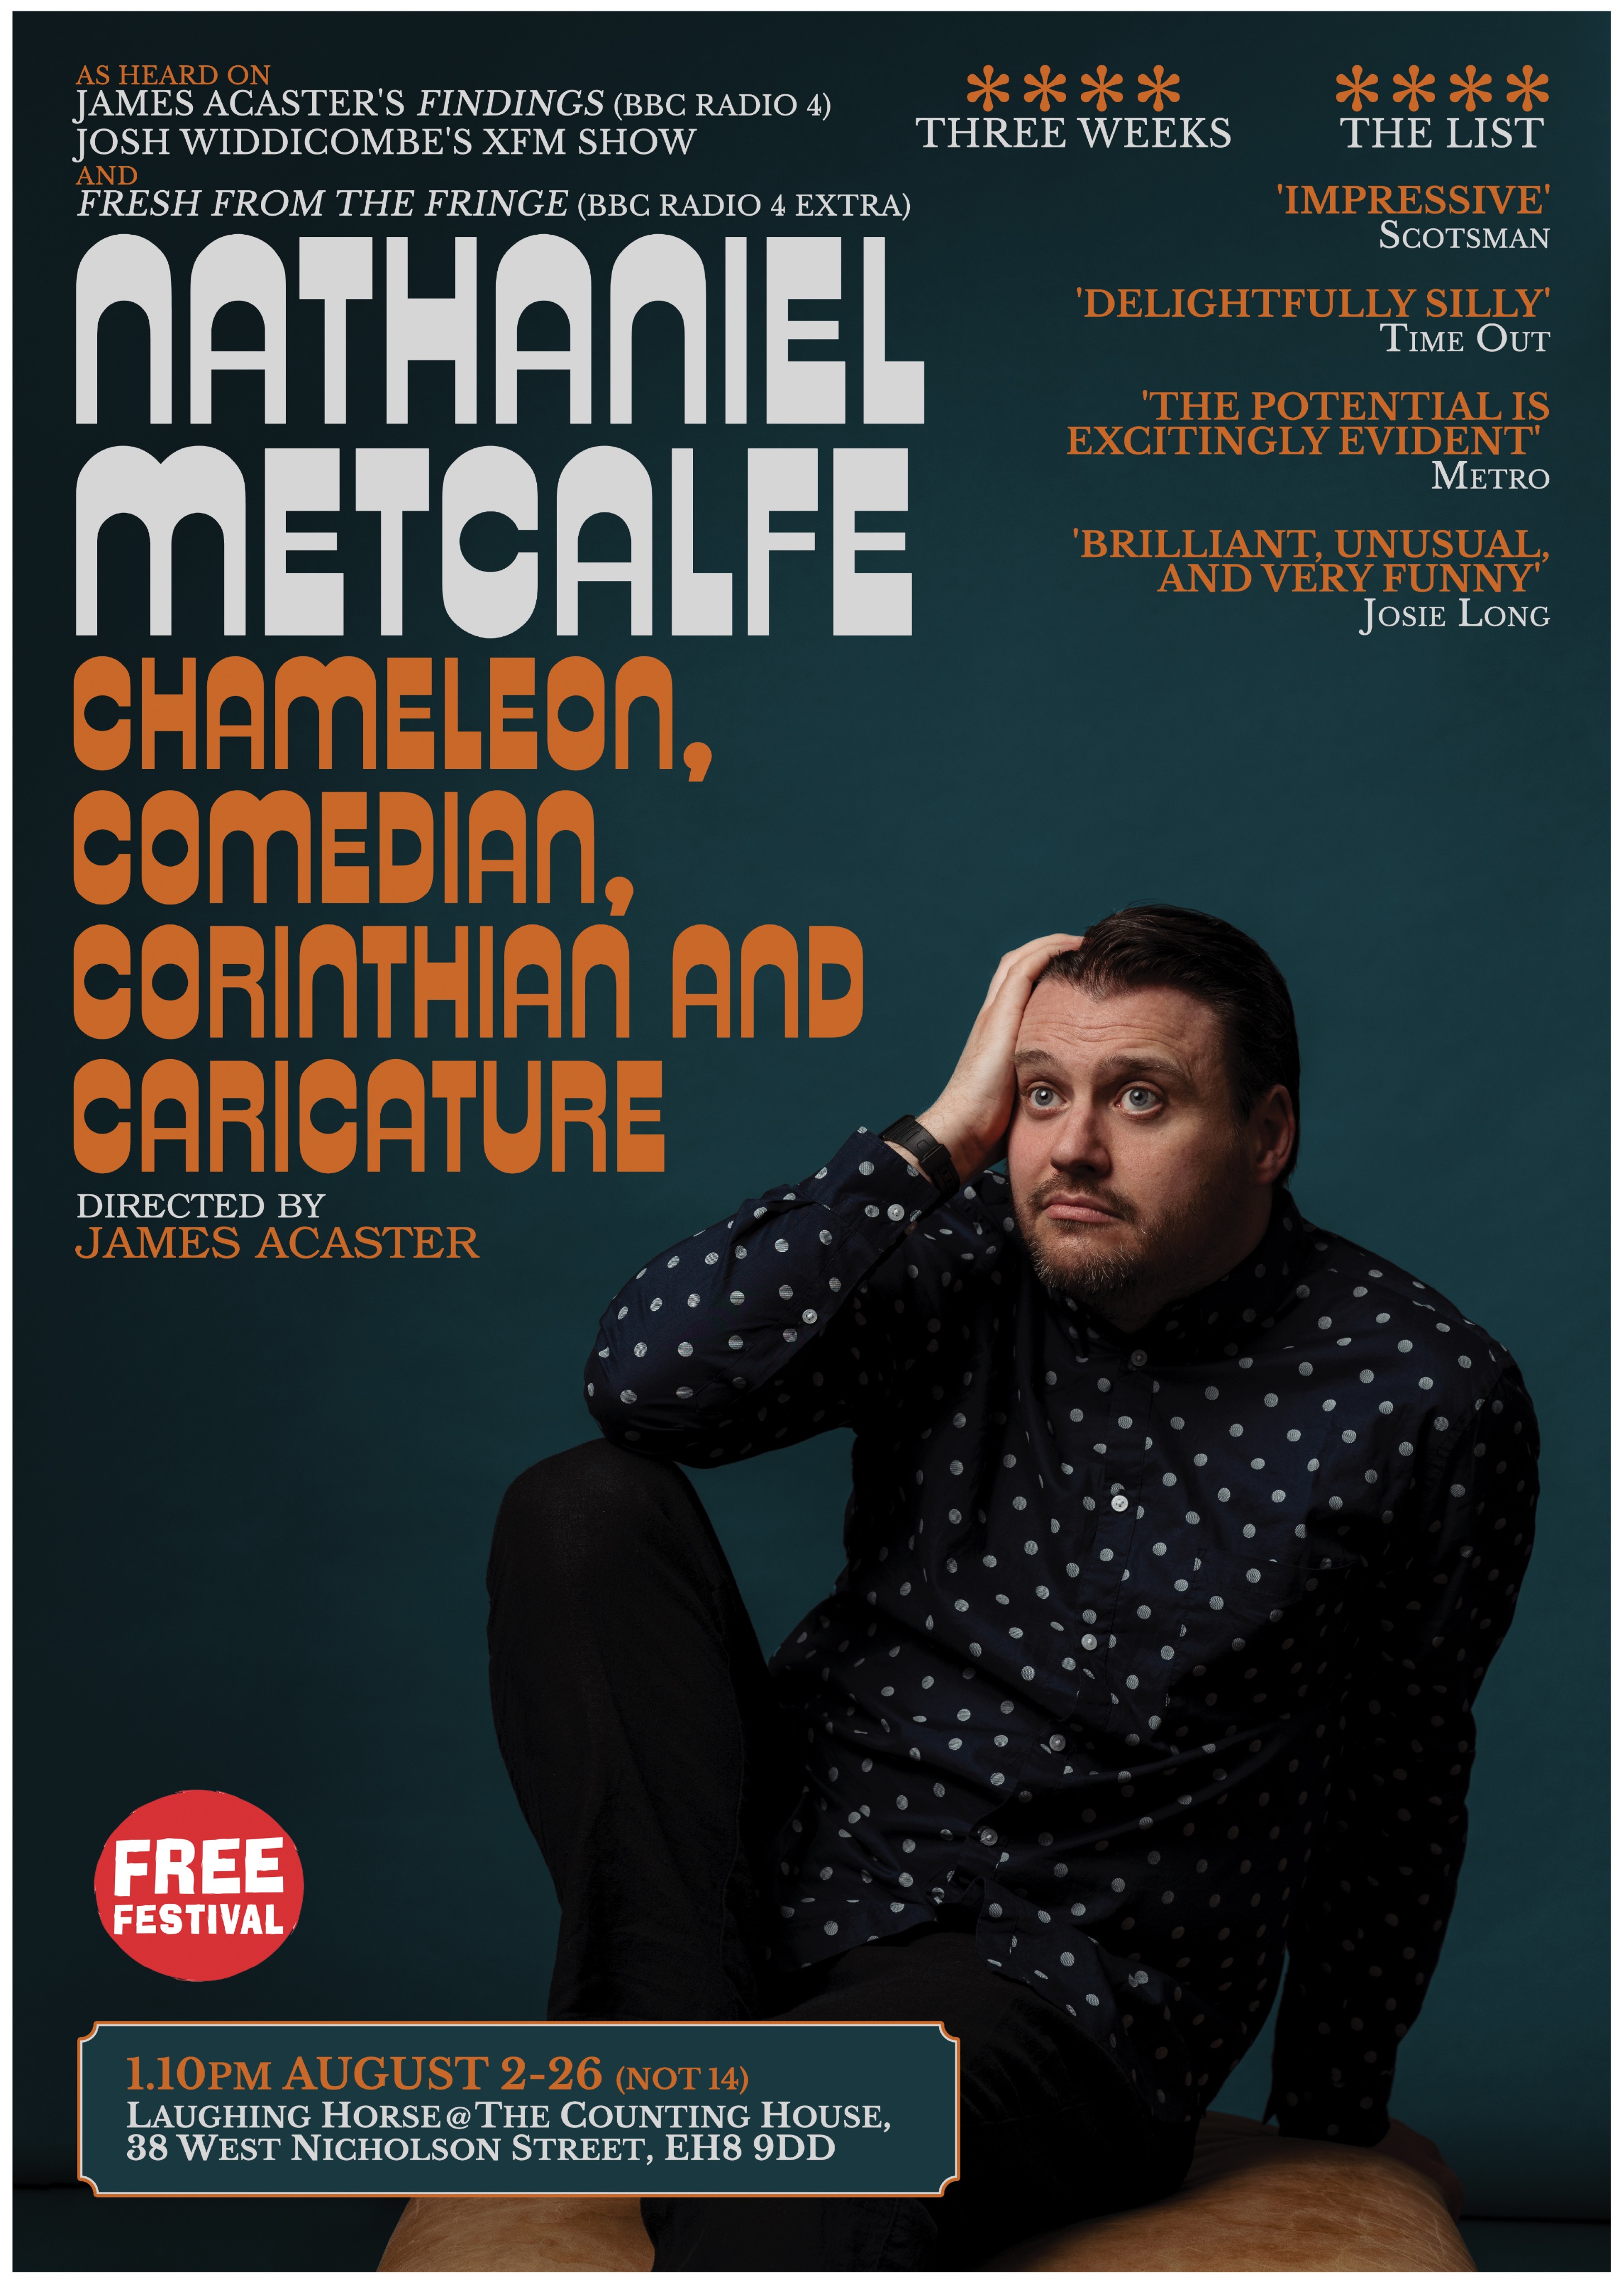 The poster for Nathaniel Metcalfe: Chameleon, Comedian, Corinthian and Caricature